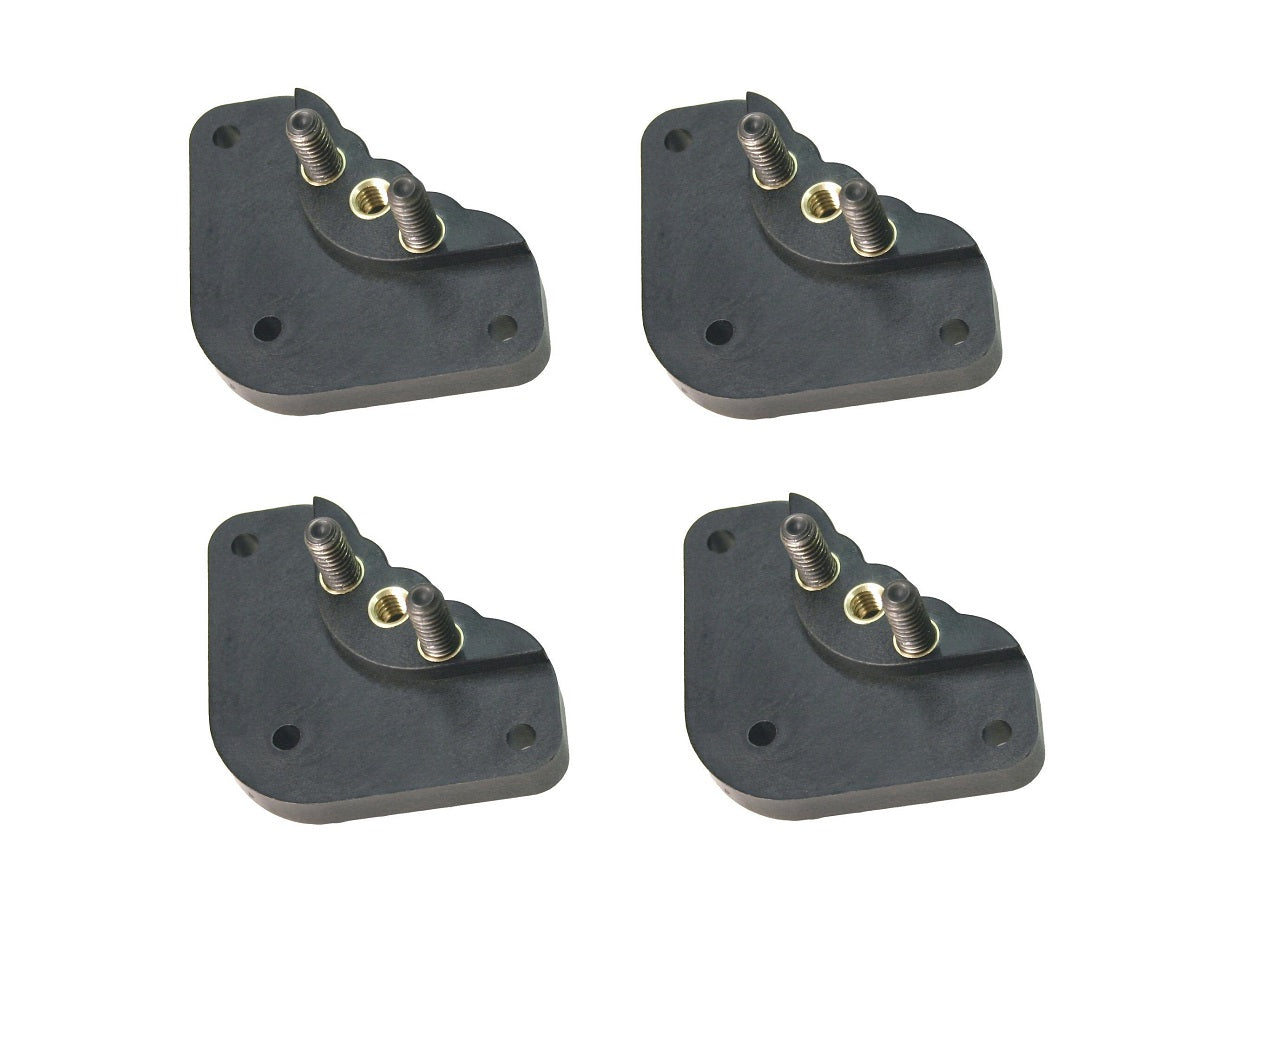 KREG® Precision Router Table Insert Plate Levelers  pack of 4 - PRS3040